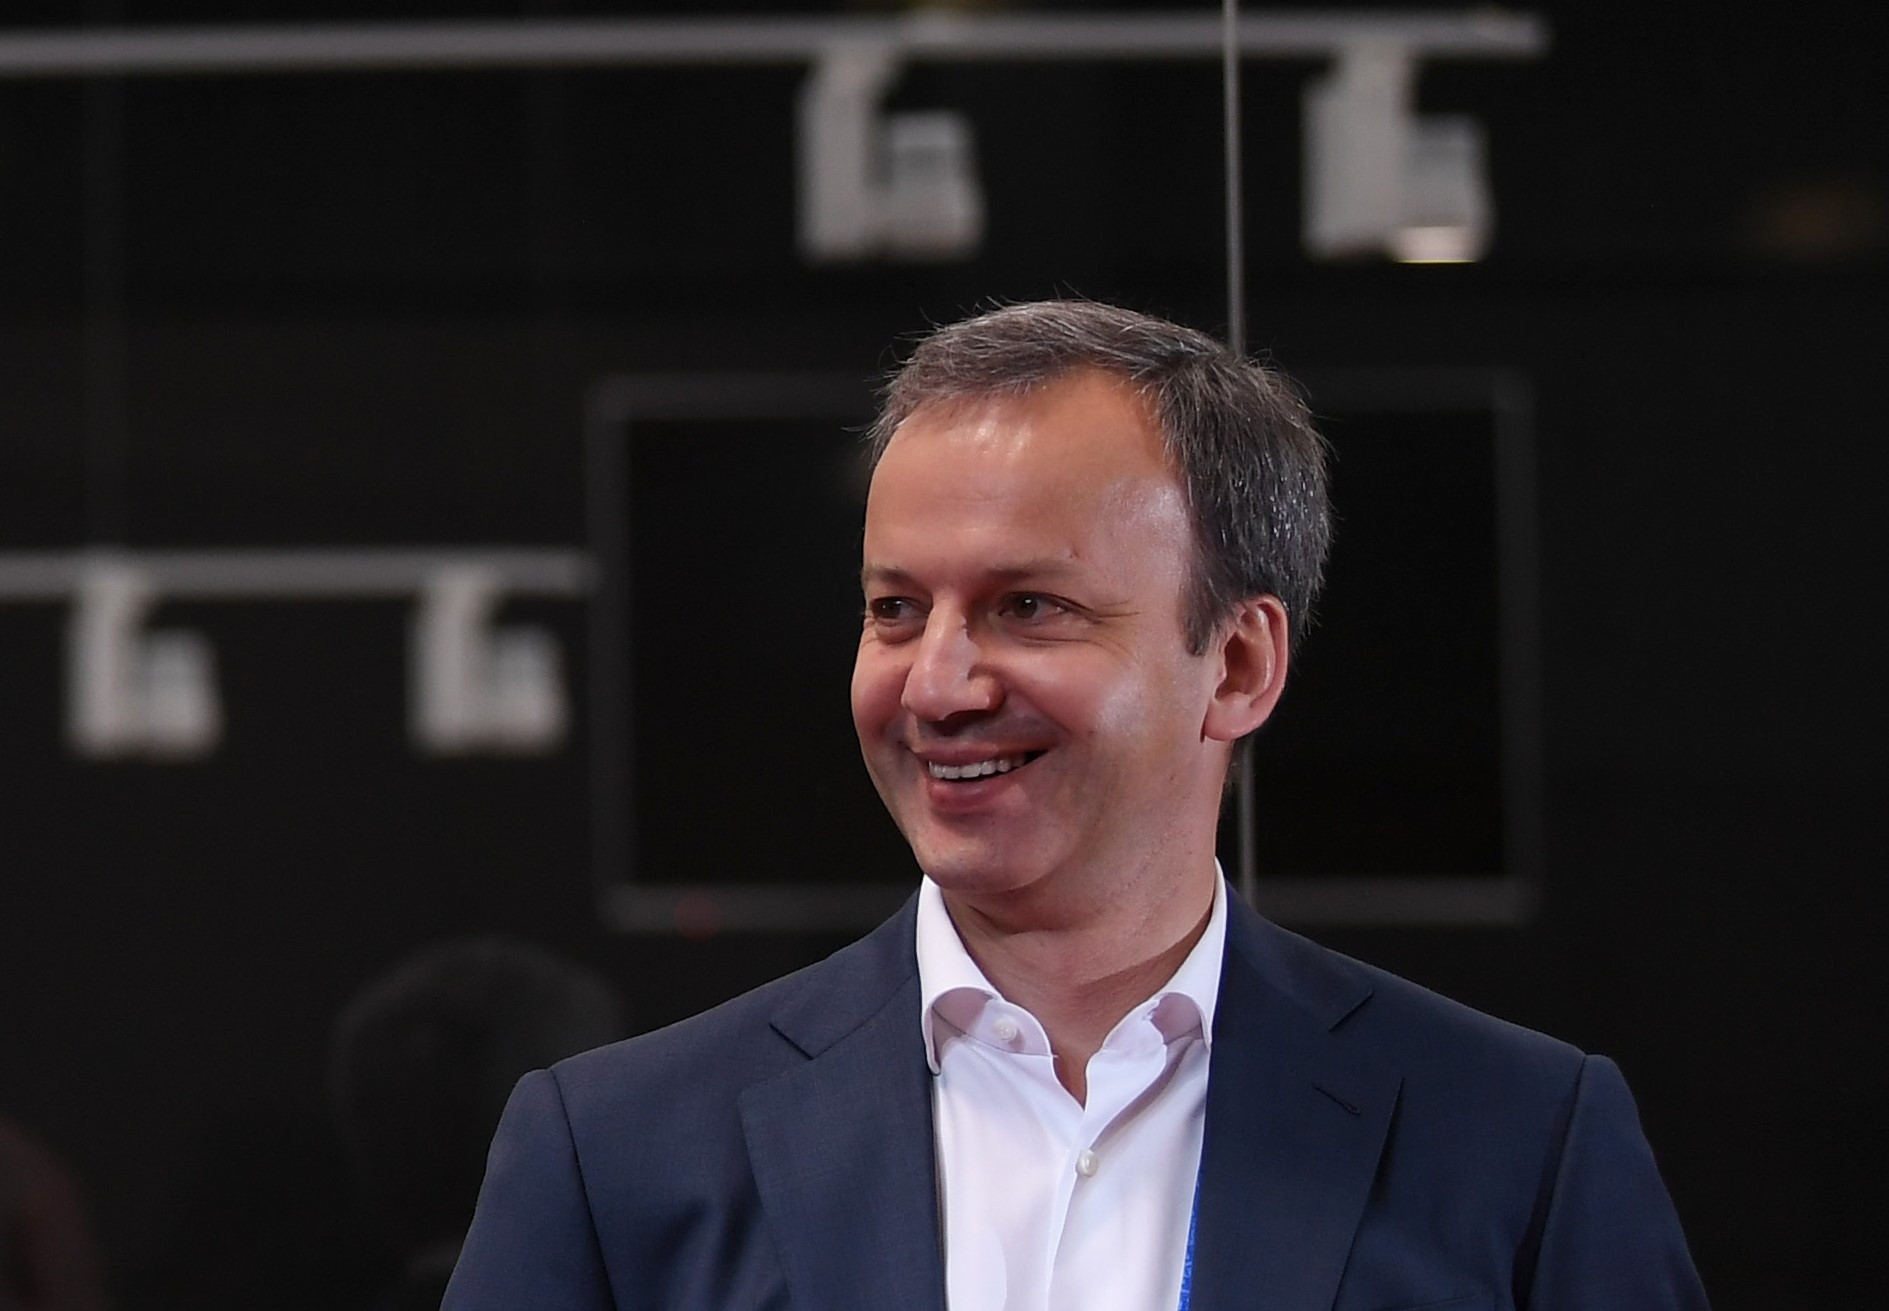 Arkady Dvorkovich has won a second term as International Chess Federation President ©Getty Images